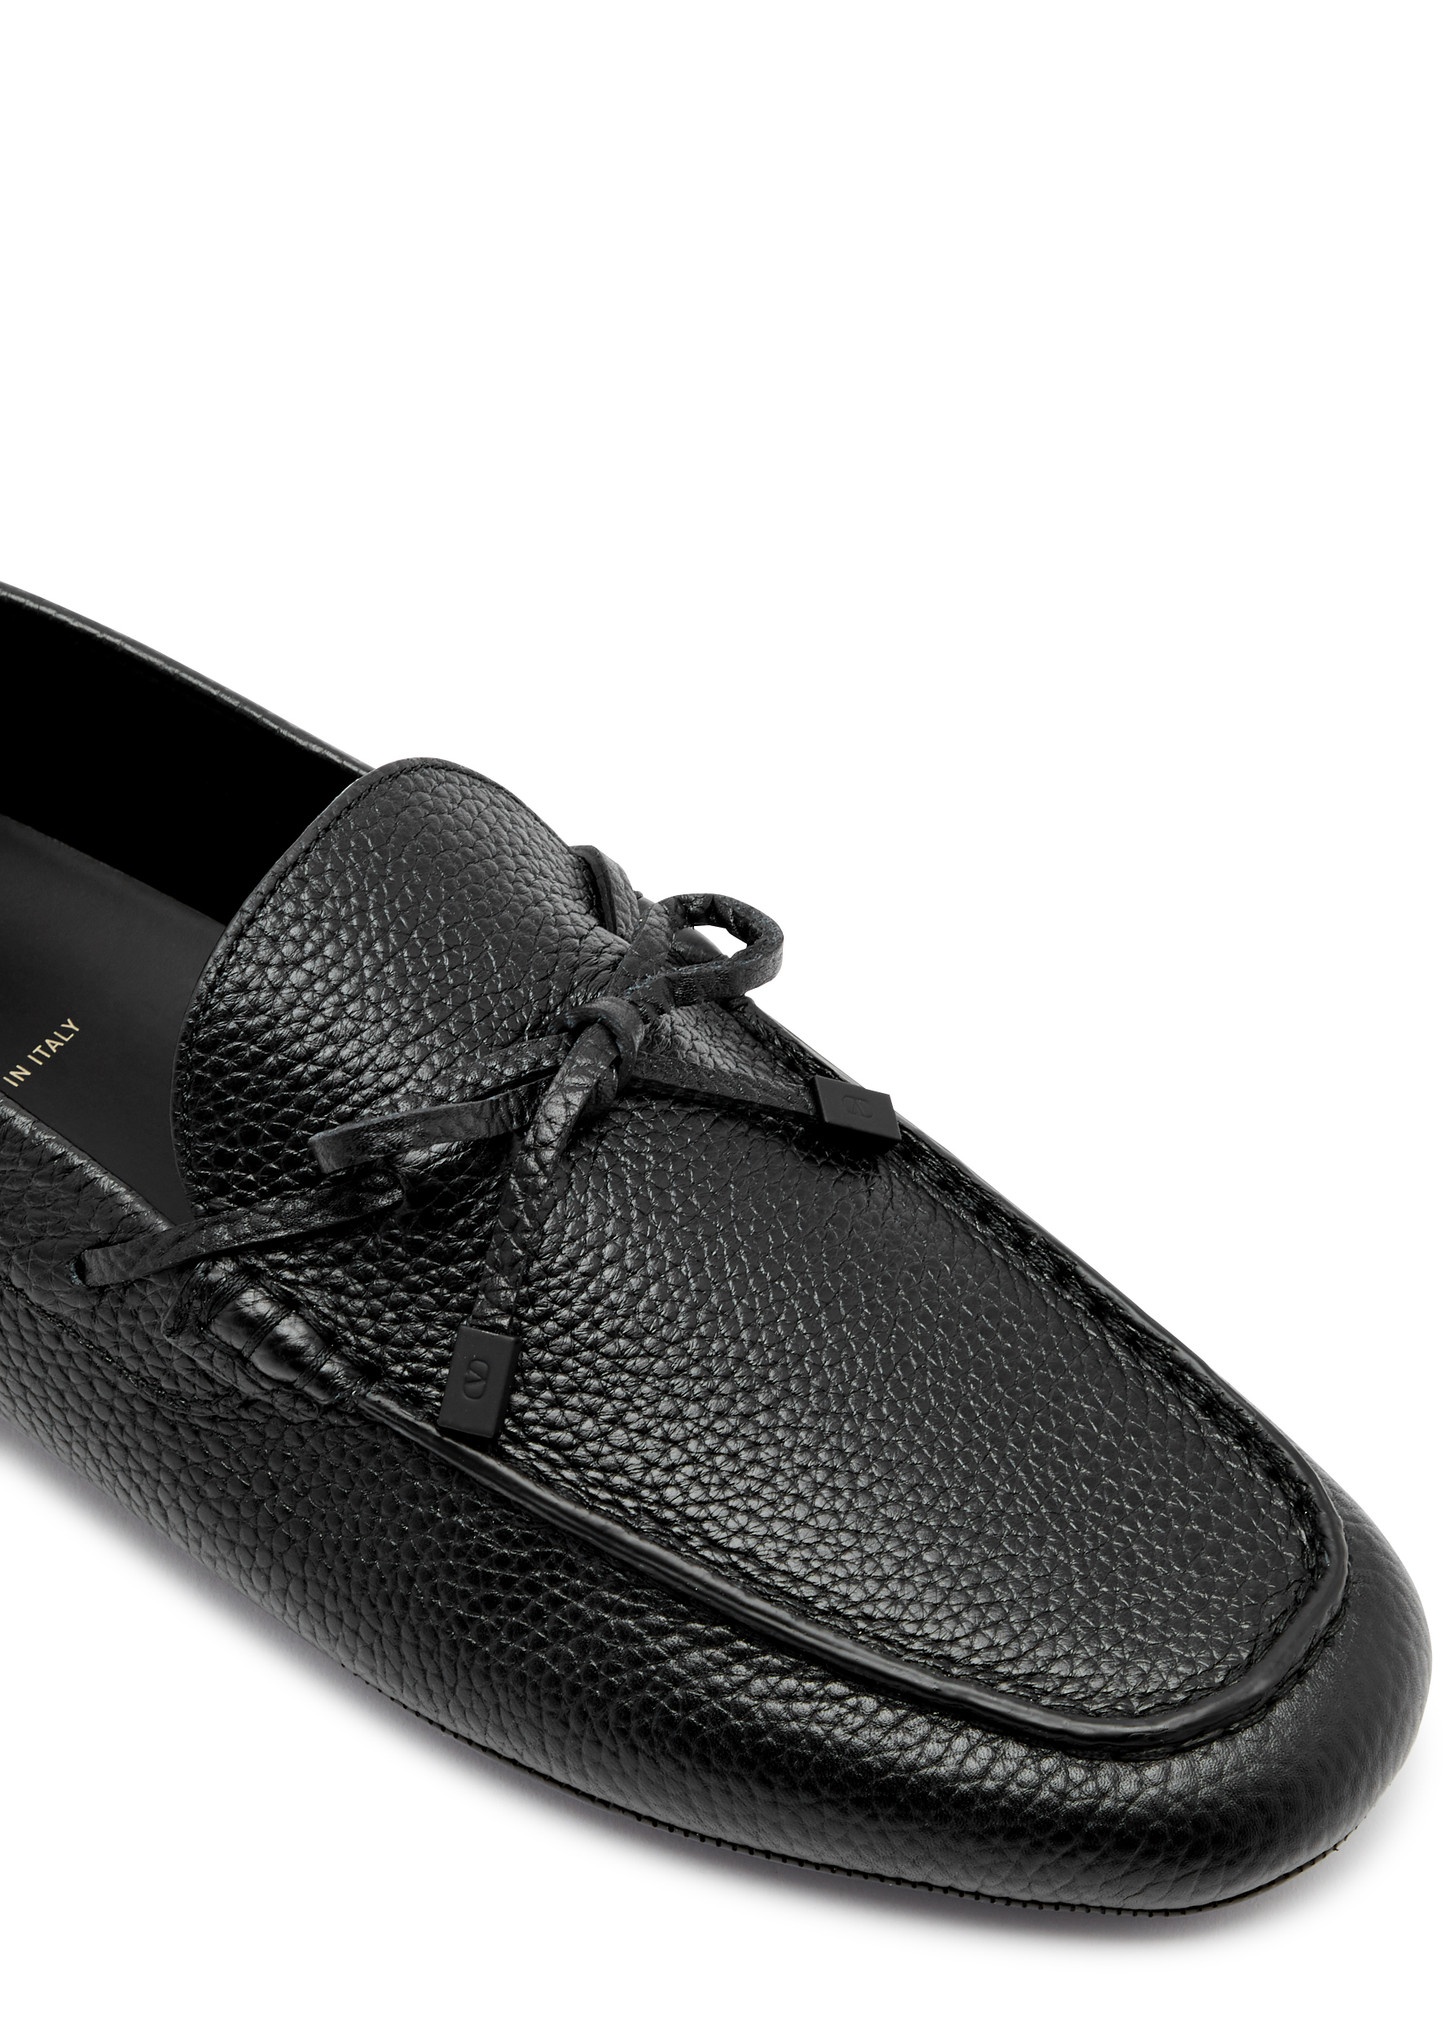 VLogo grained leather driving shoes - 4